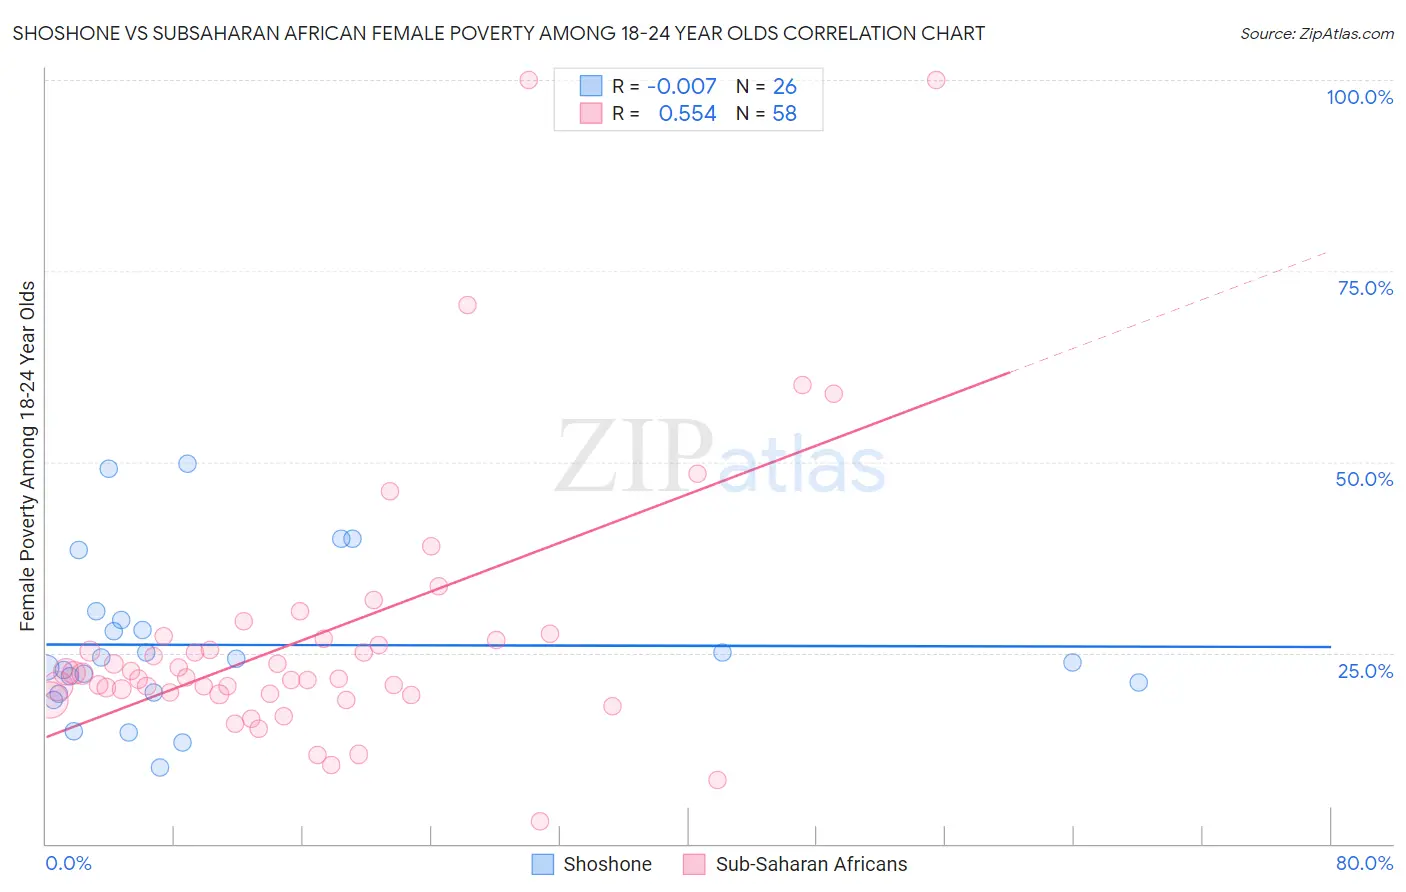 Shoshone vs Subsaharan African Female Poverty Among 18-24 Year Olds